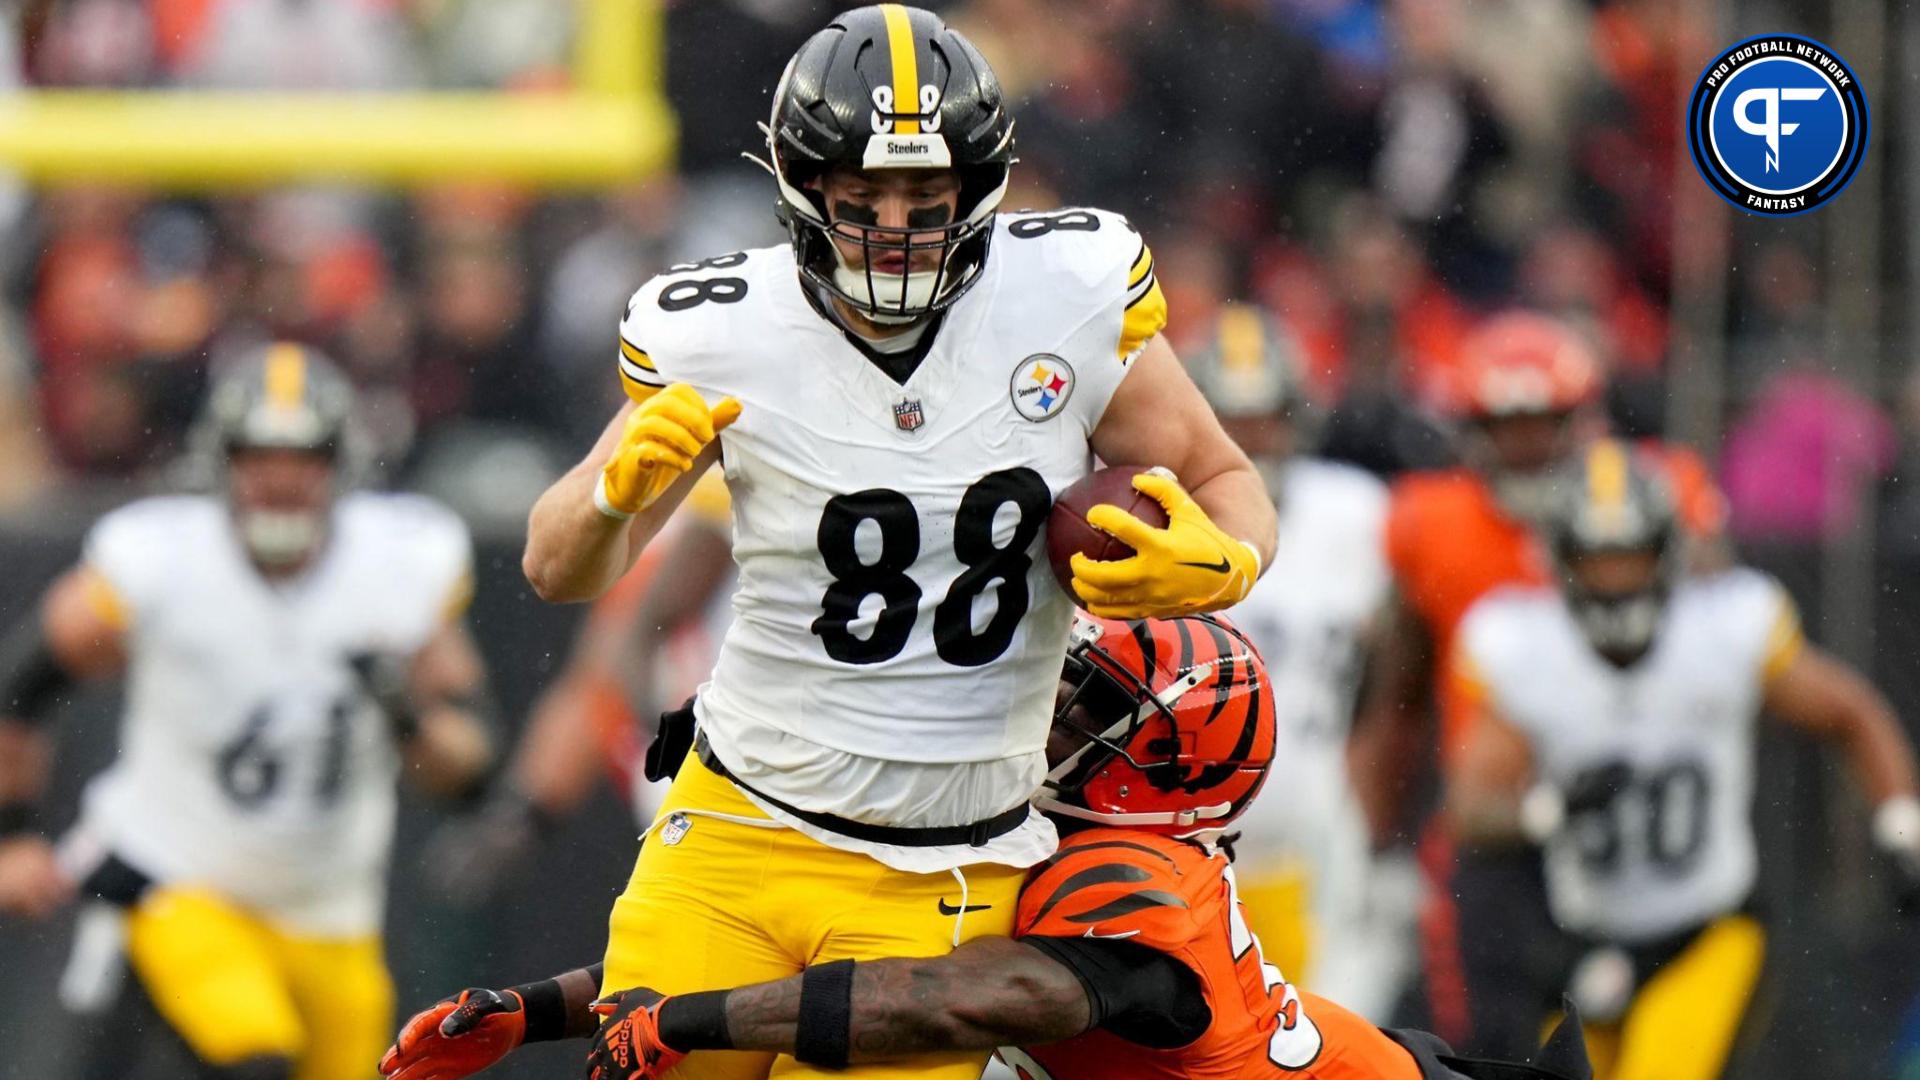 Pittsburgh Steelers tight end Pat Freiermuth (88) is tackled by Cincinnati Bengals safety Nick Scott (33) after a catch a in the first quarter at Paycor Stadium.